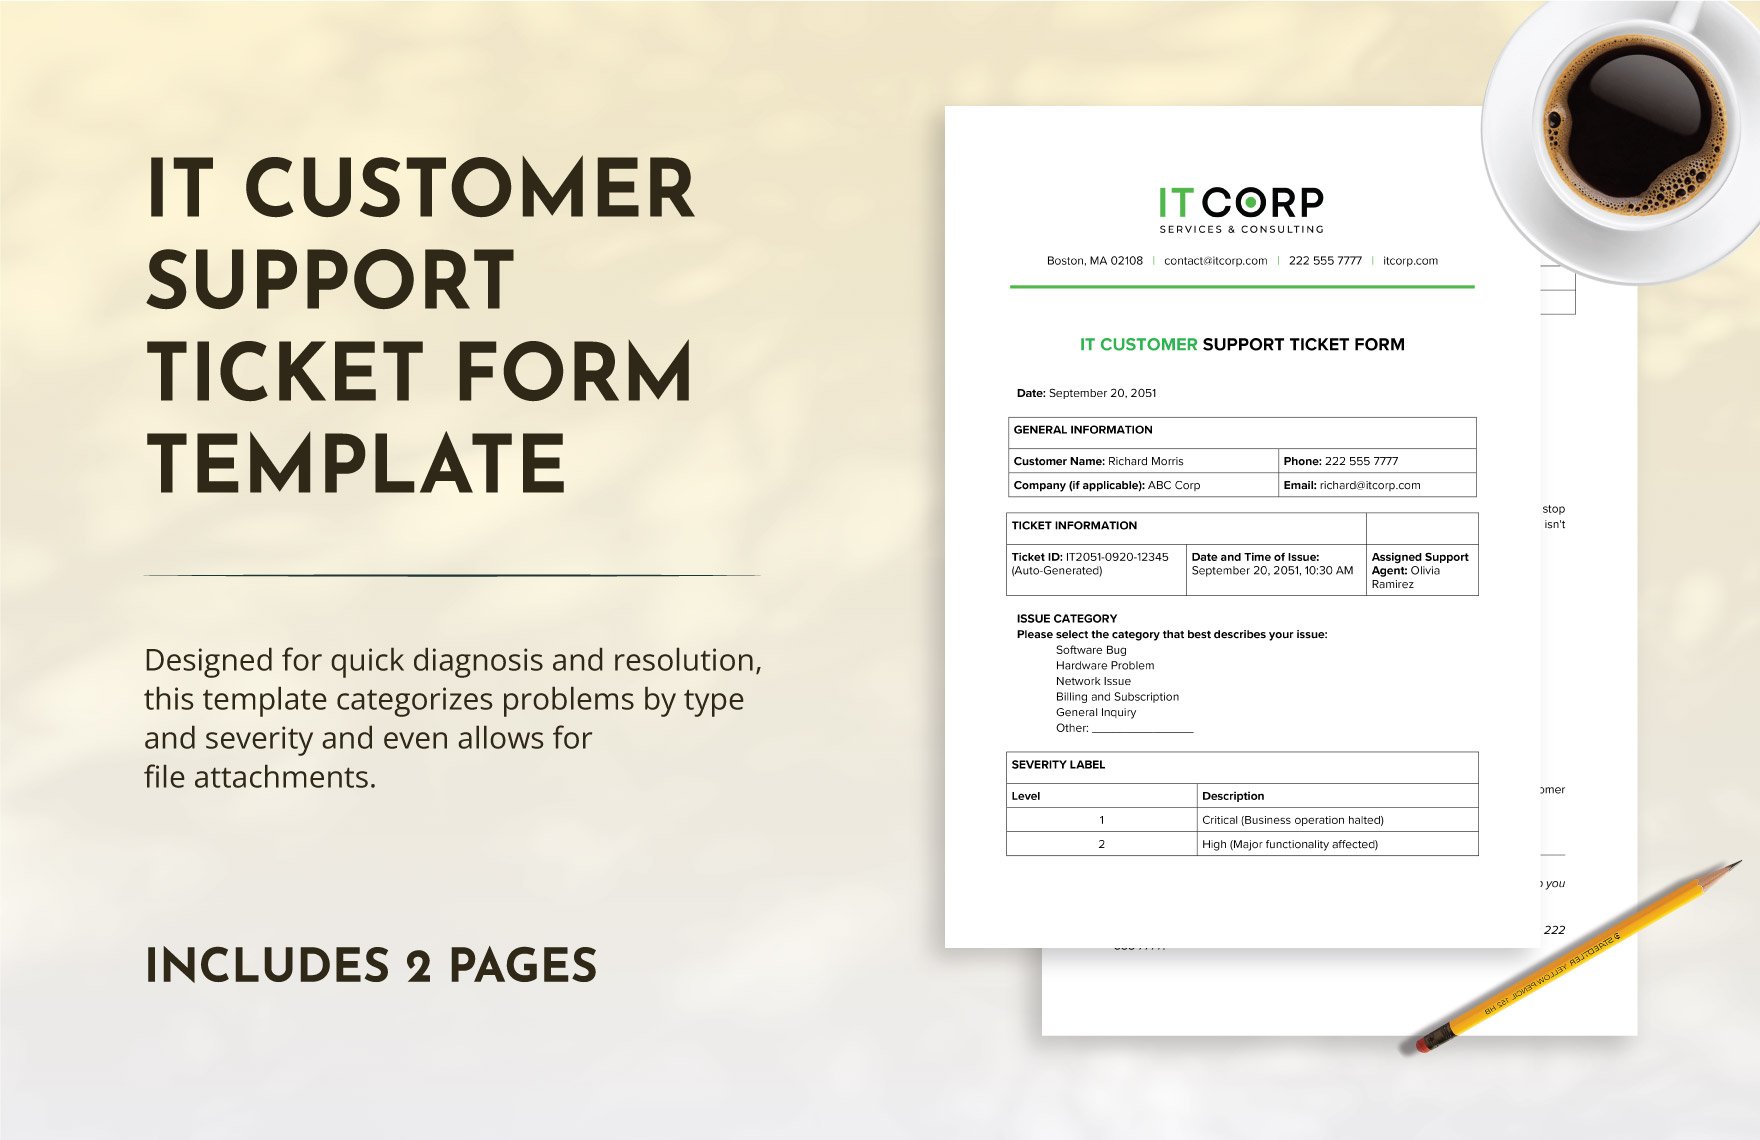 IT Customer Support Ticket Form Template